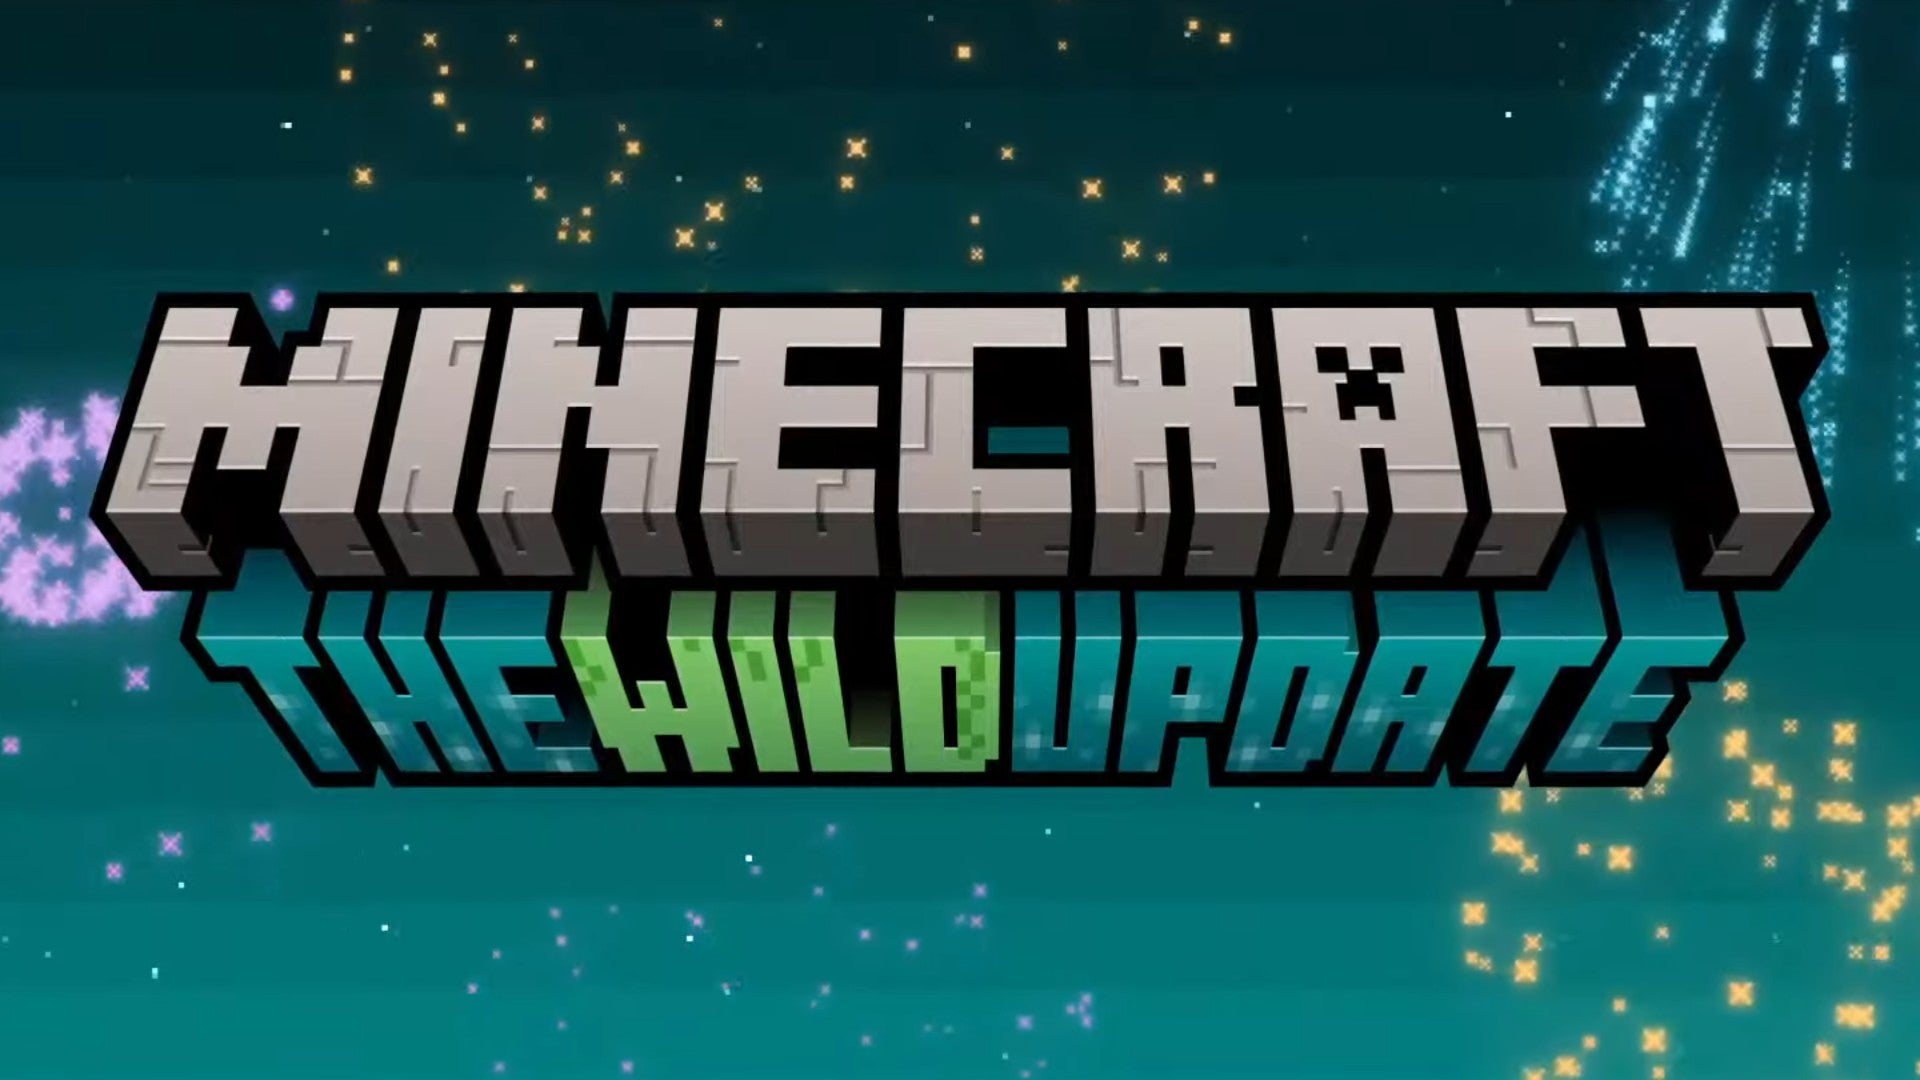 Logo for The Wild update, coming to Minecraft in 2022. Fireworks surround the logo